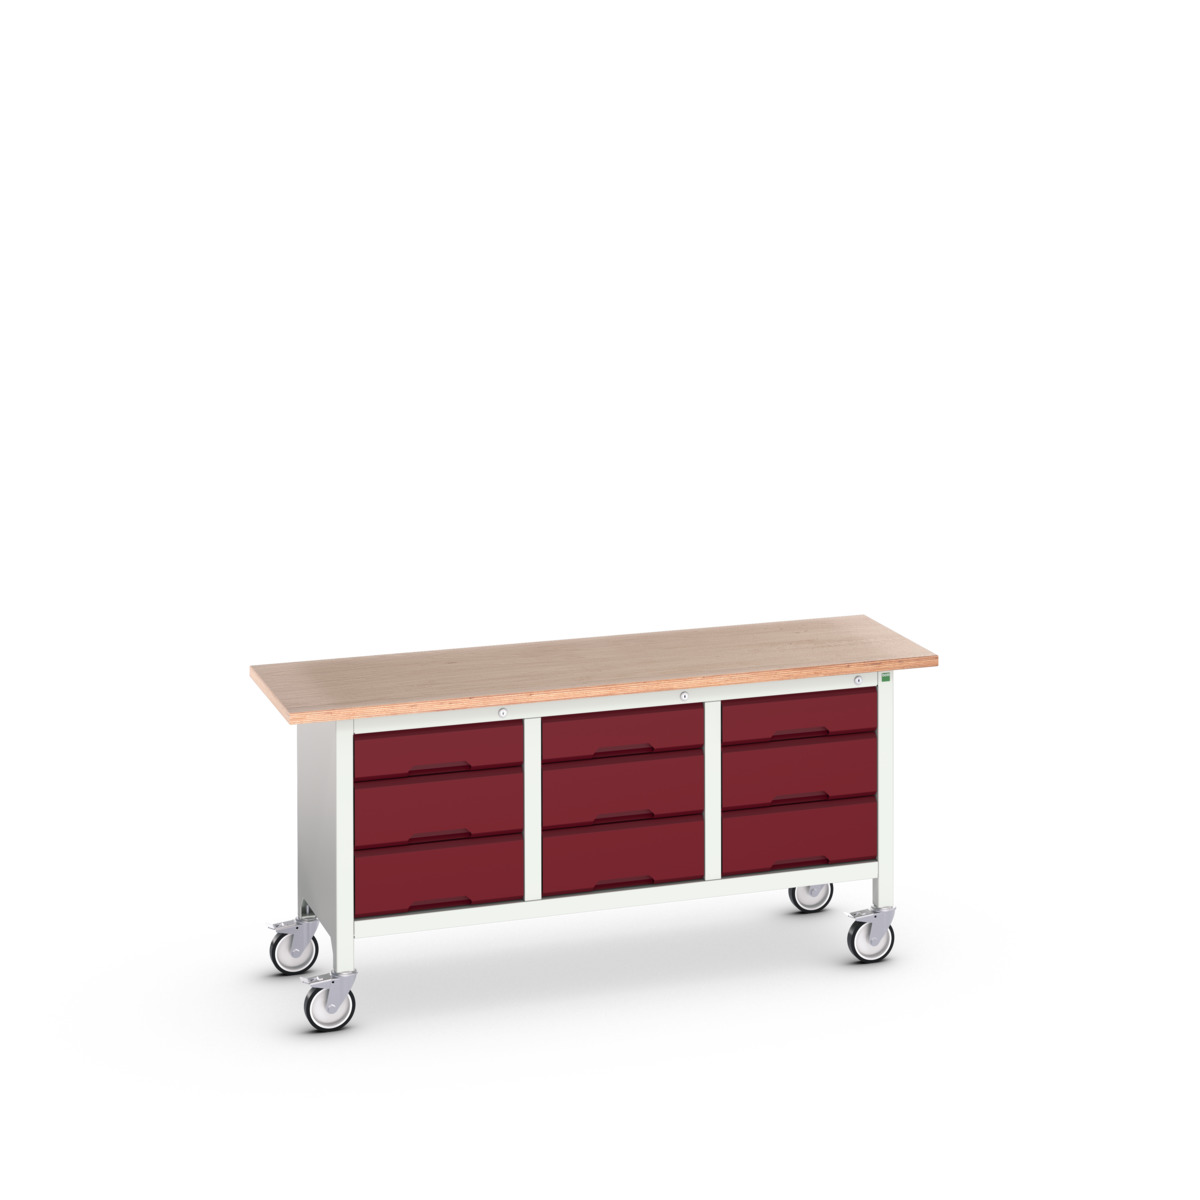 16923223.24 - verso mobile storage bench (mpx)